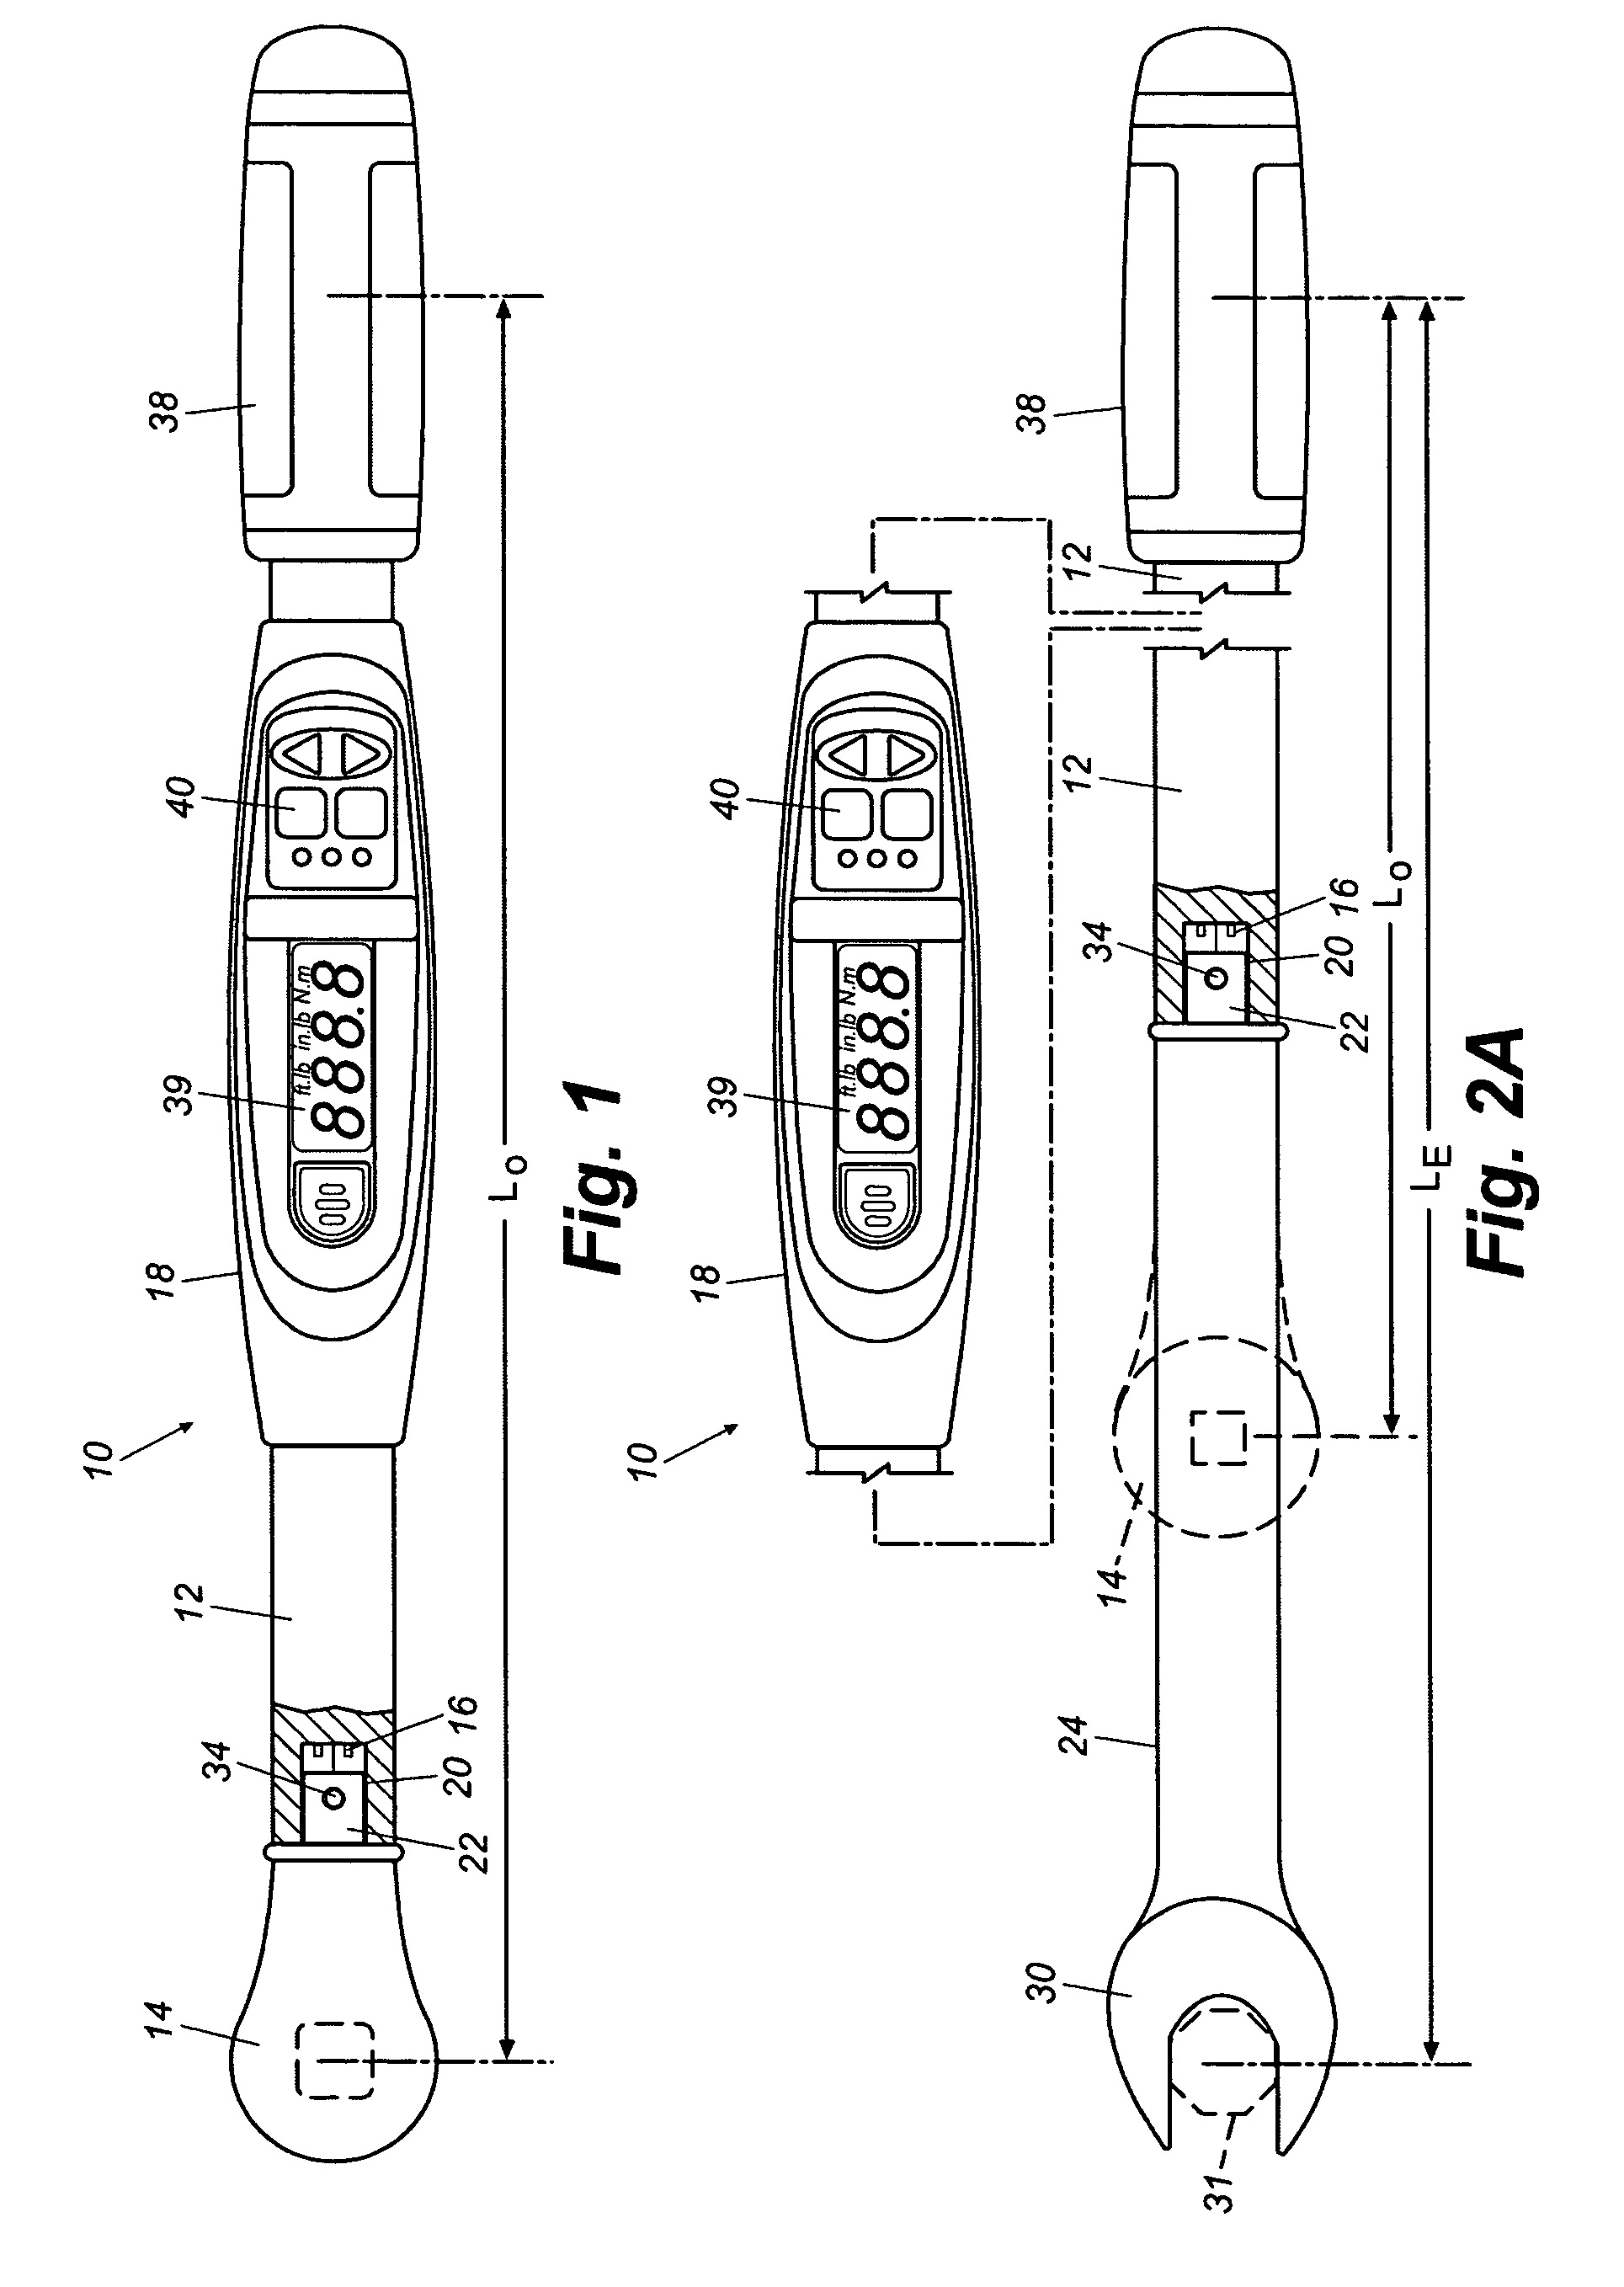 Electronic torque wrench with a torque compensation device